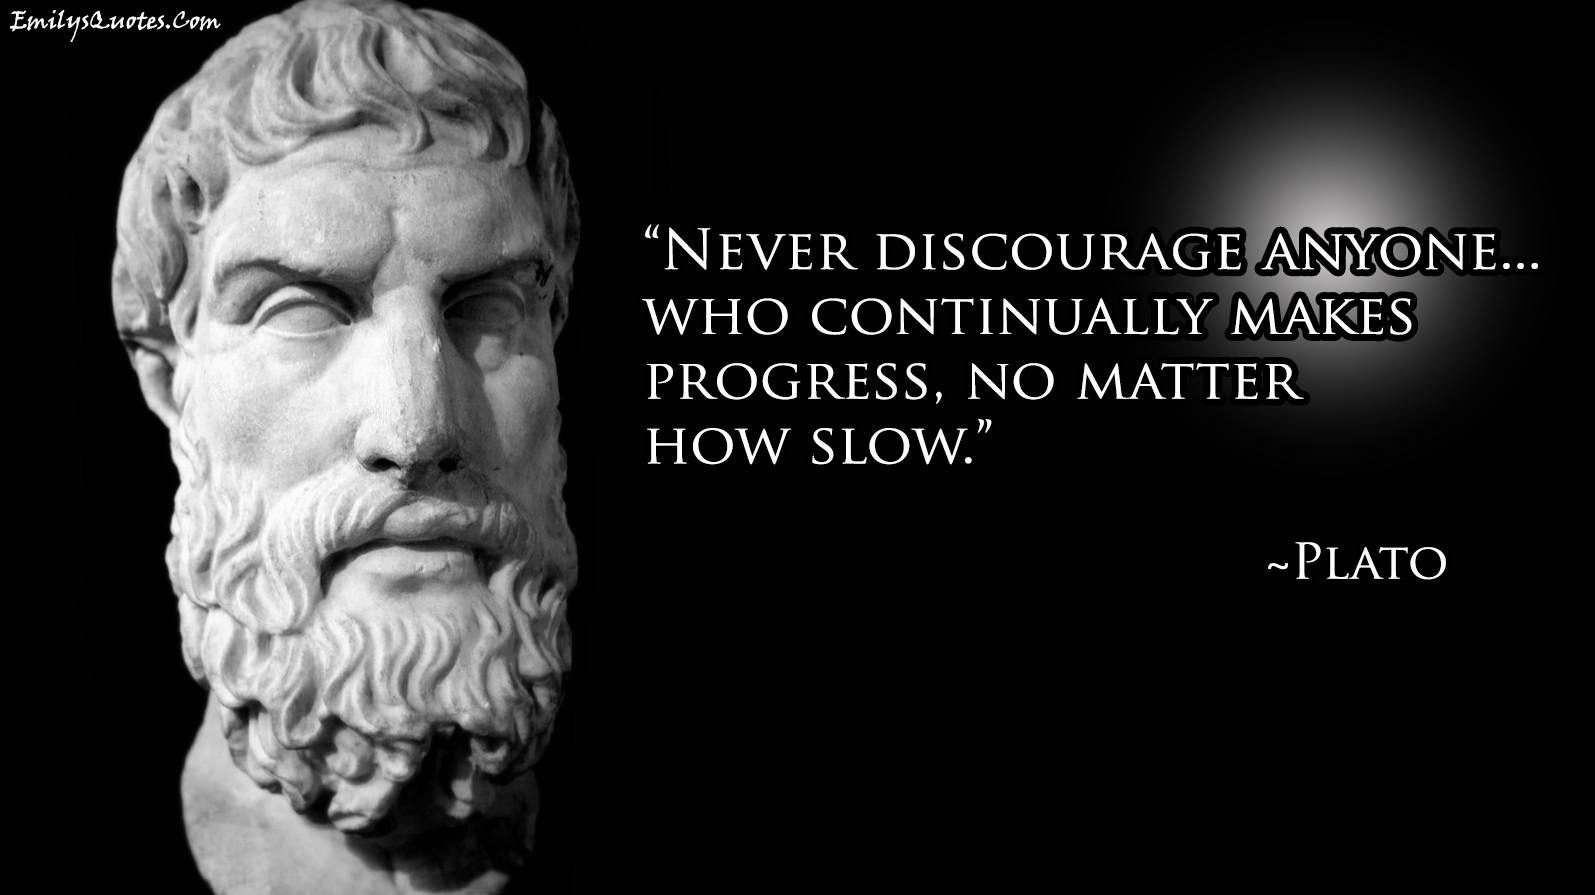 Never discourage anyone, who continually makes progress, no matter how slow